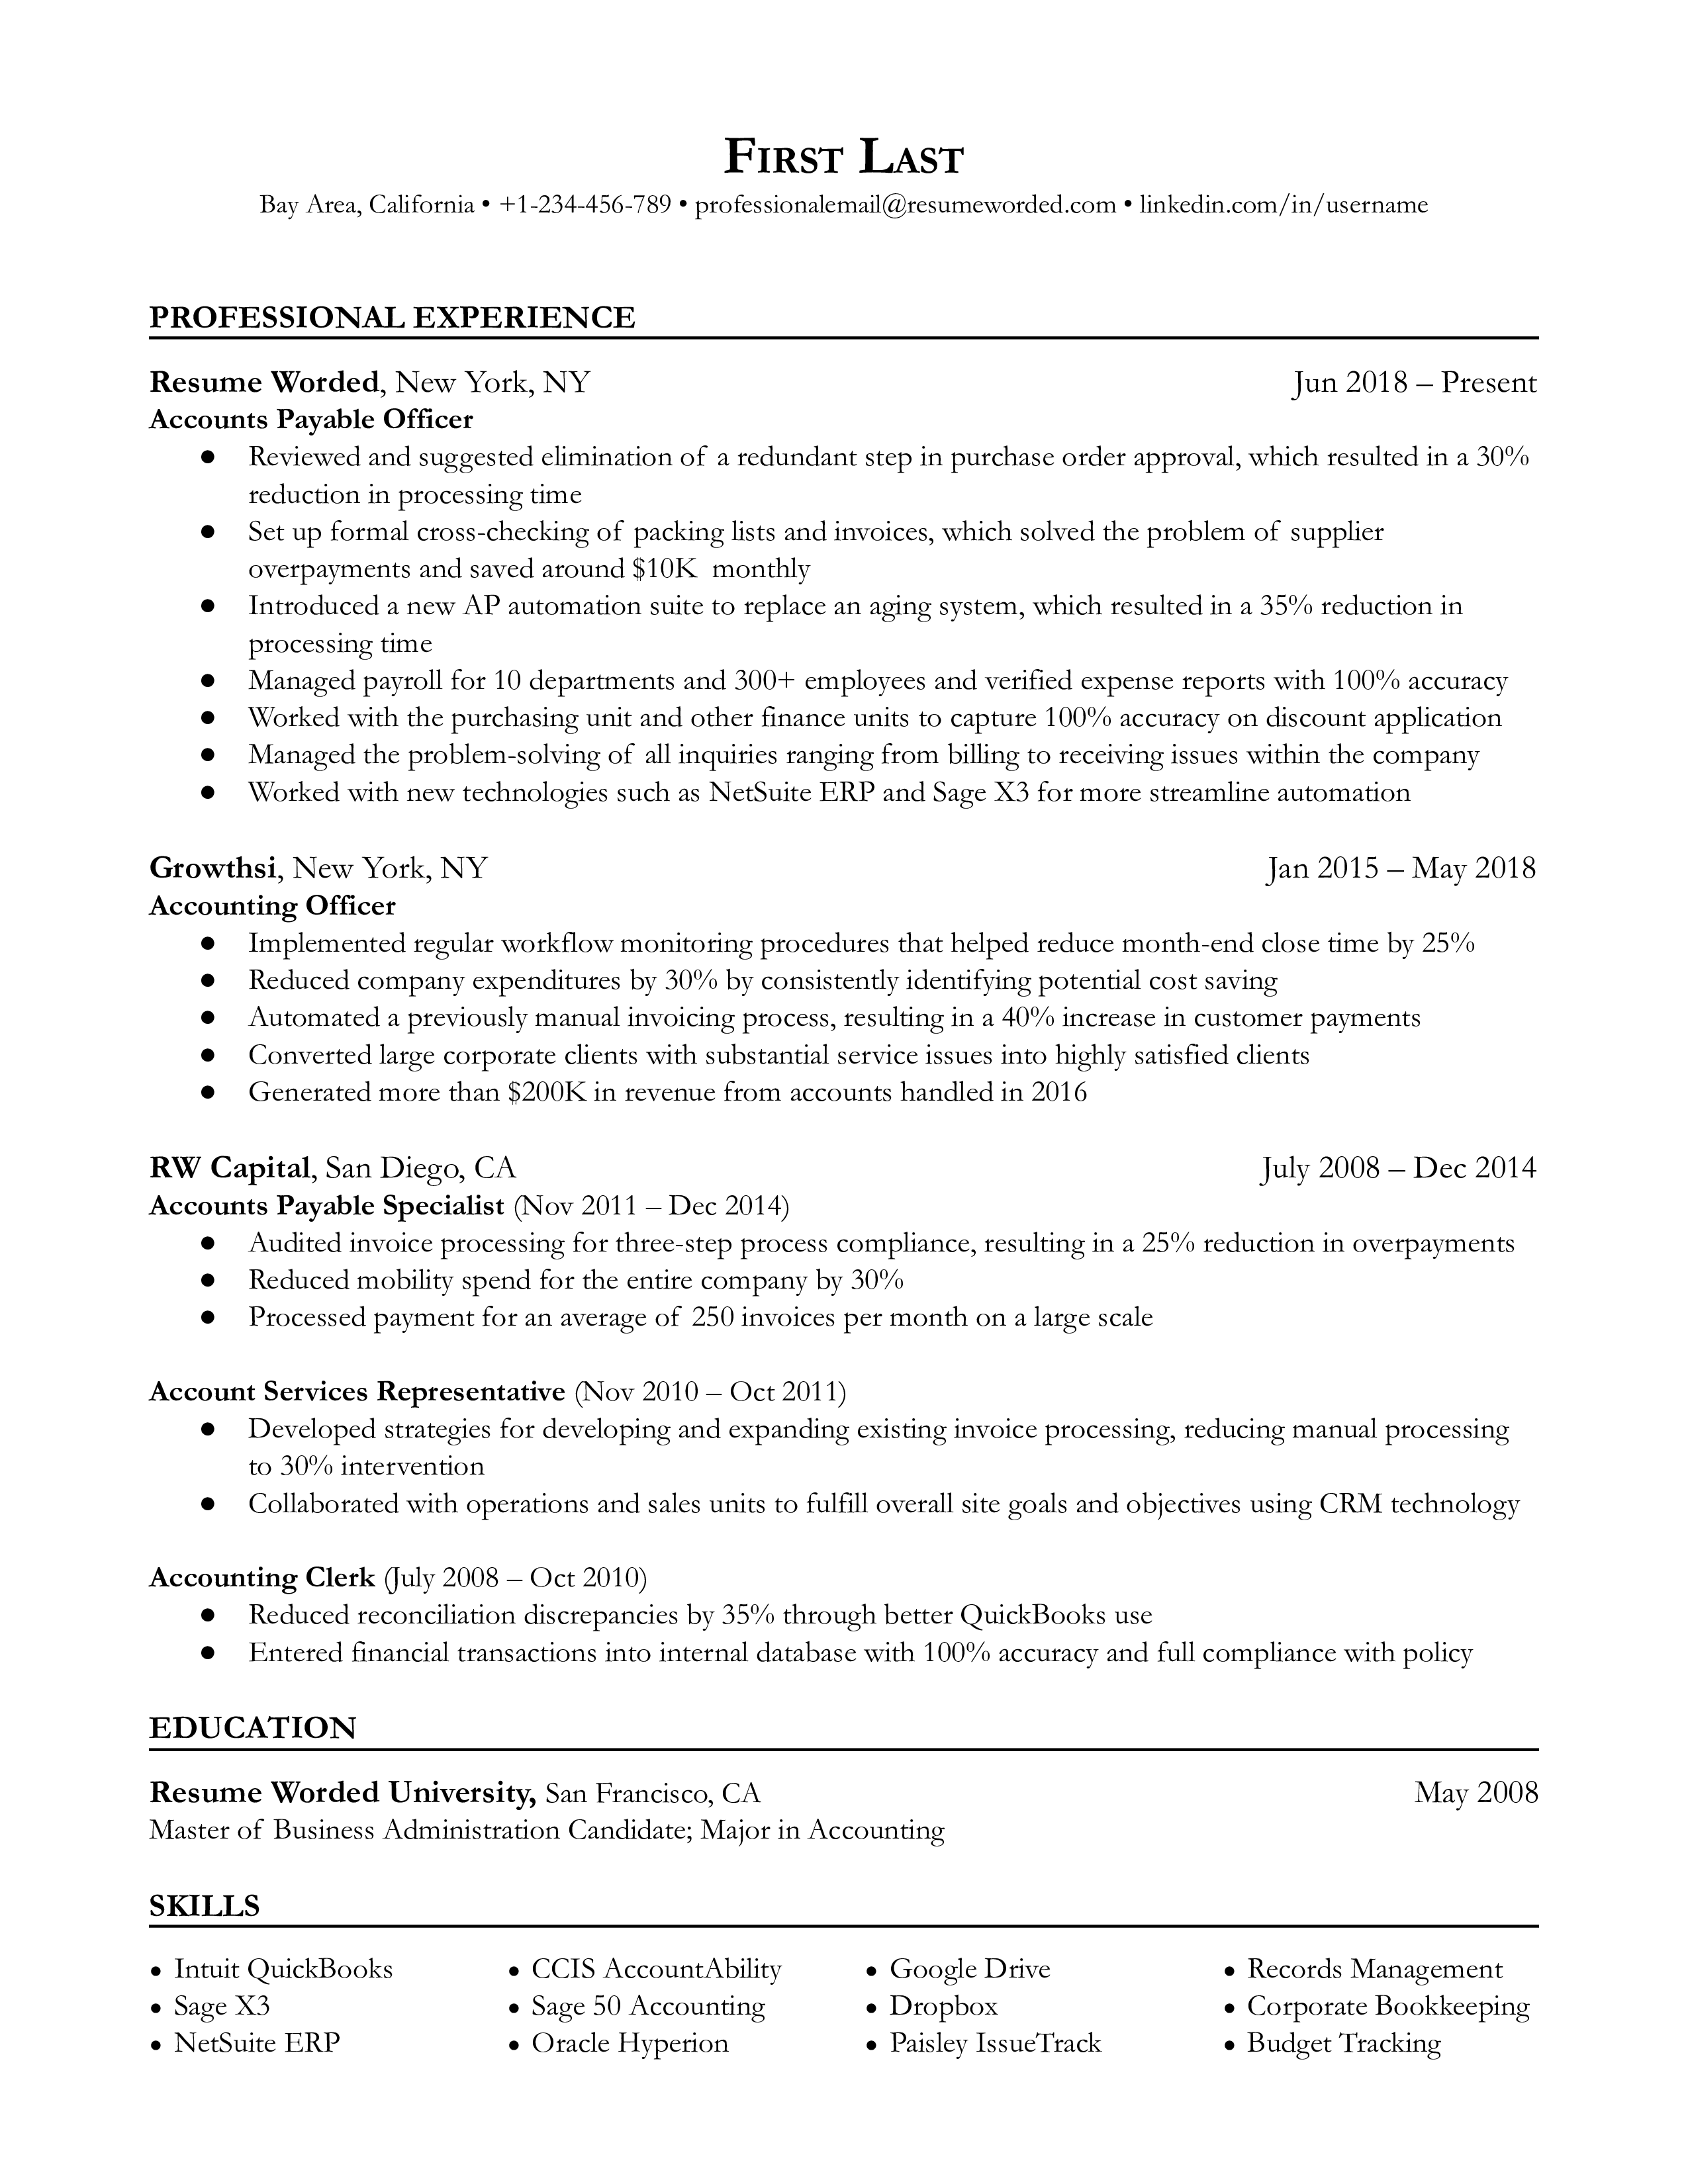 Accounts Payable Officer Resume Template + Example